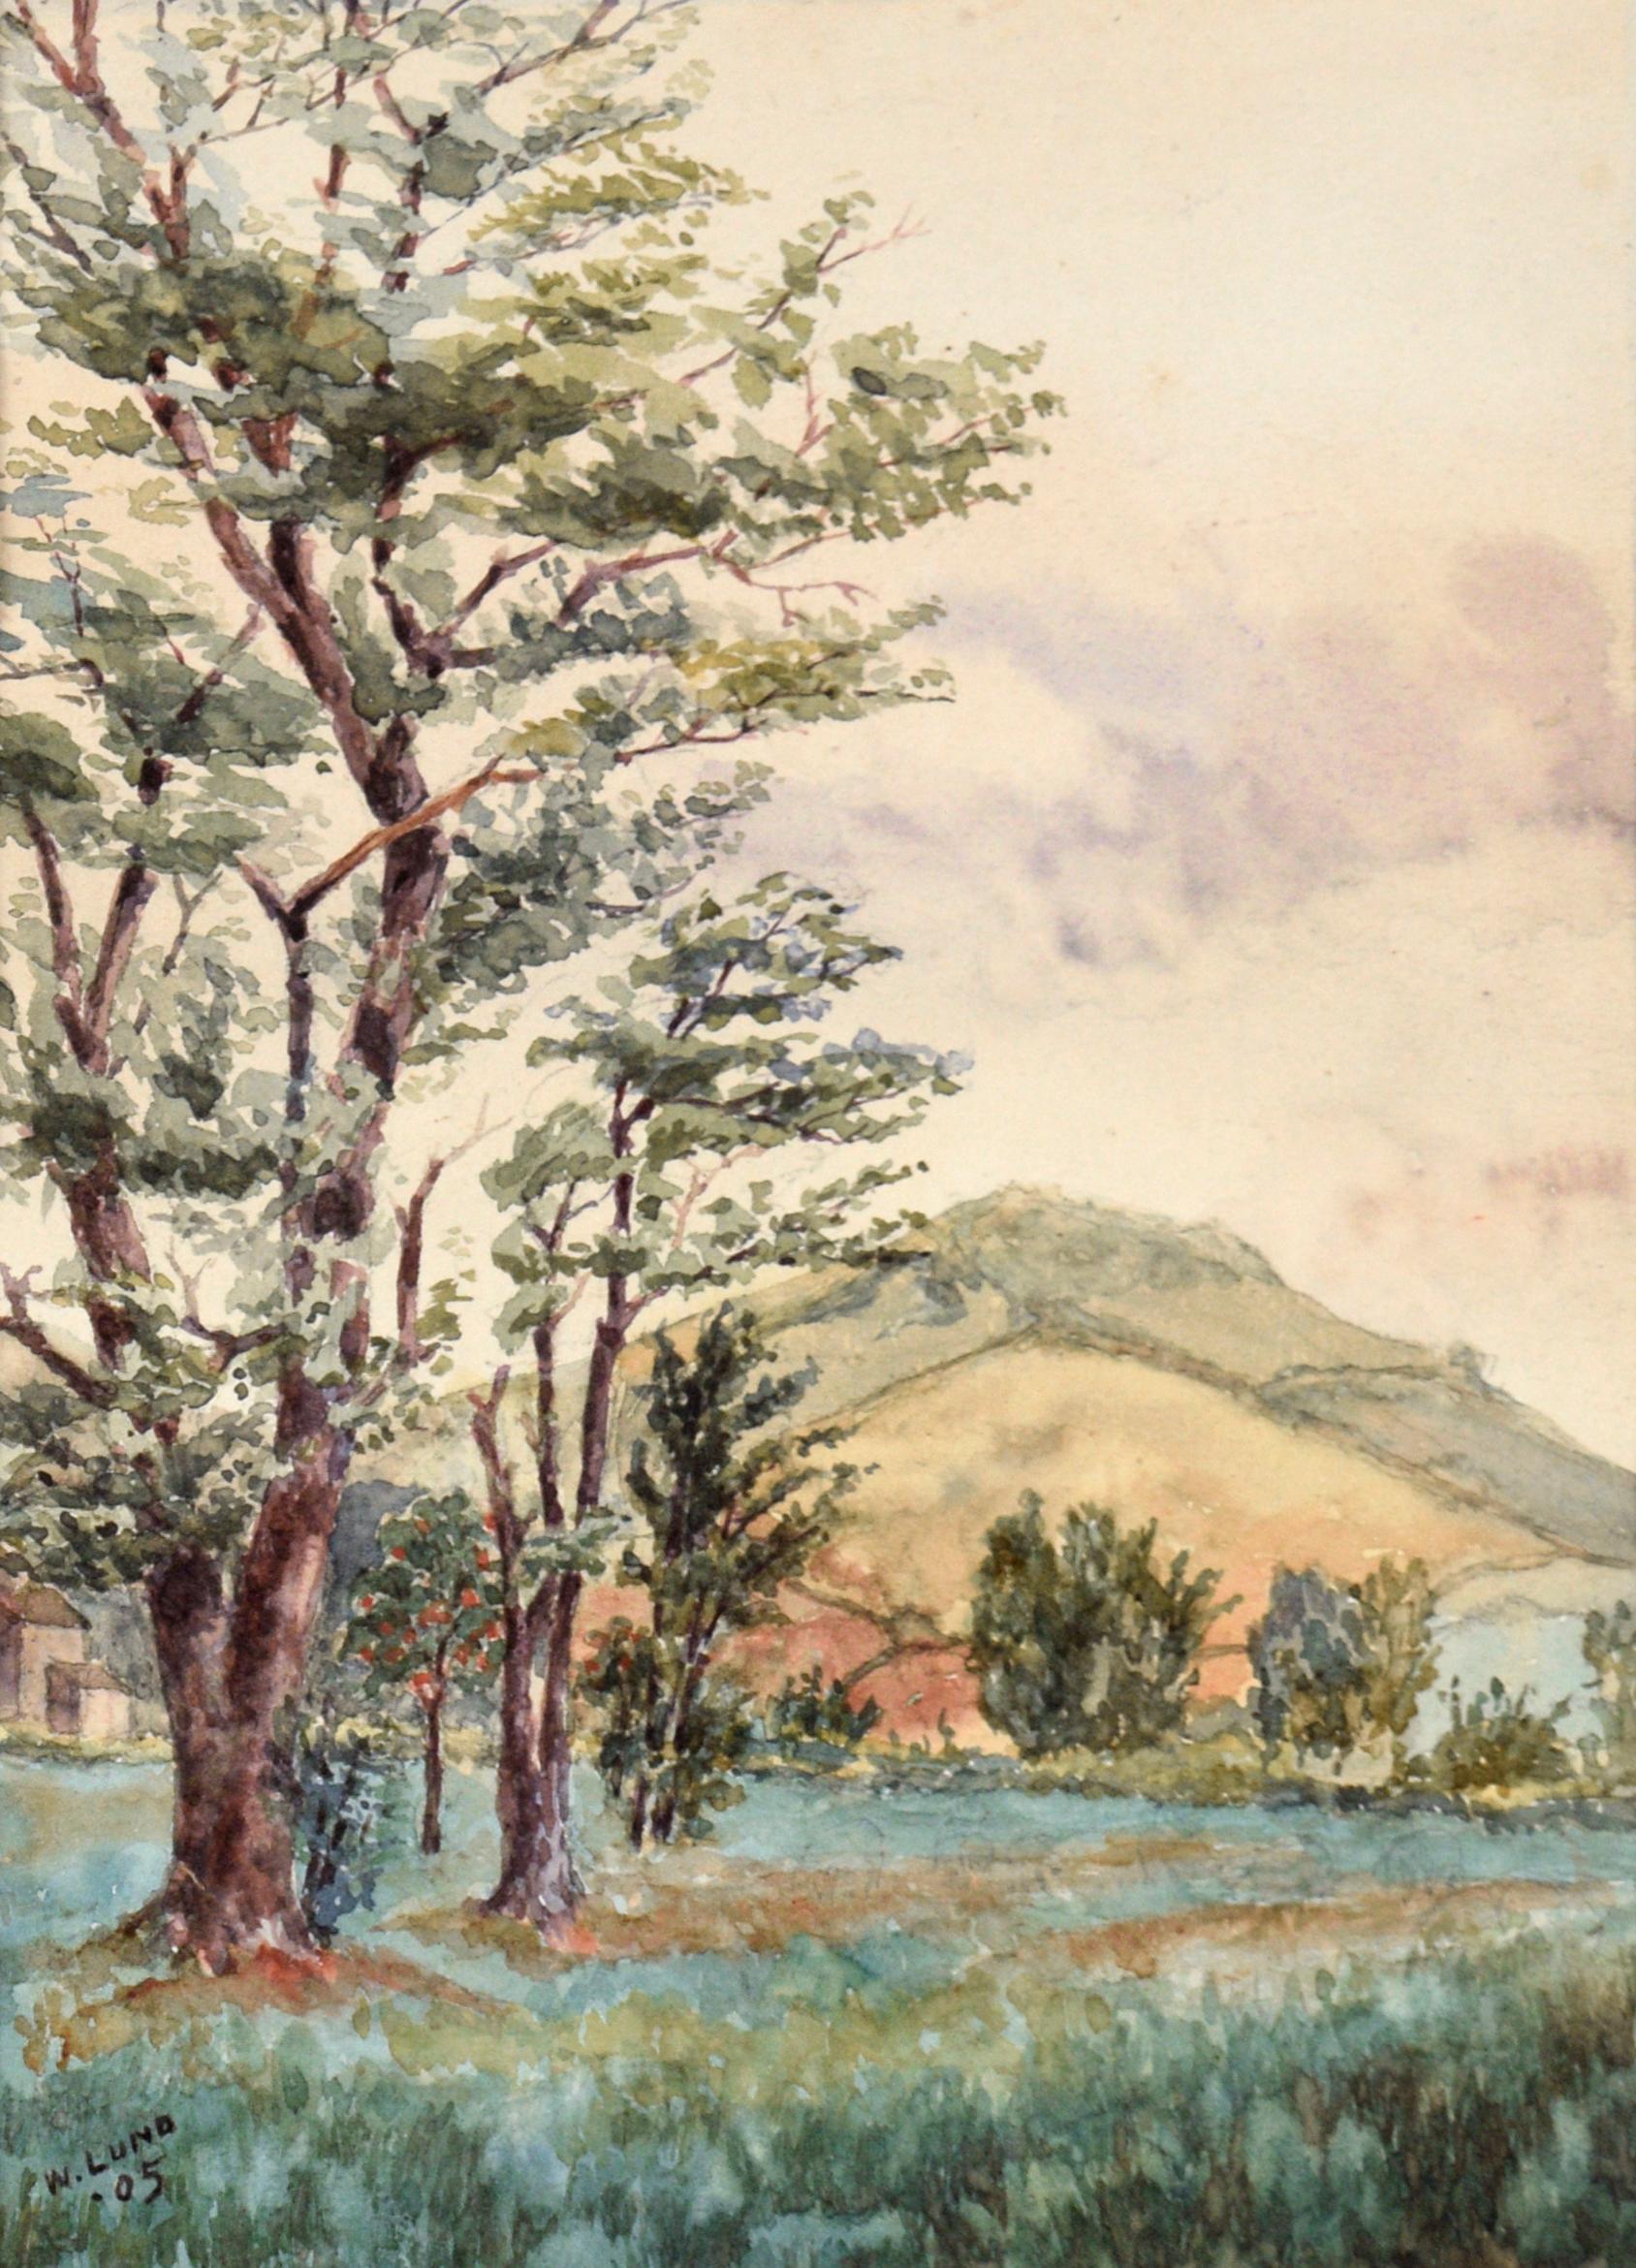 Tree-Filled Valley and Mountains in West Brighton Staten Island Watercolor 1905 - Painting by W Lund